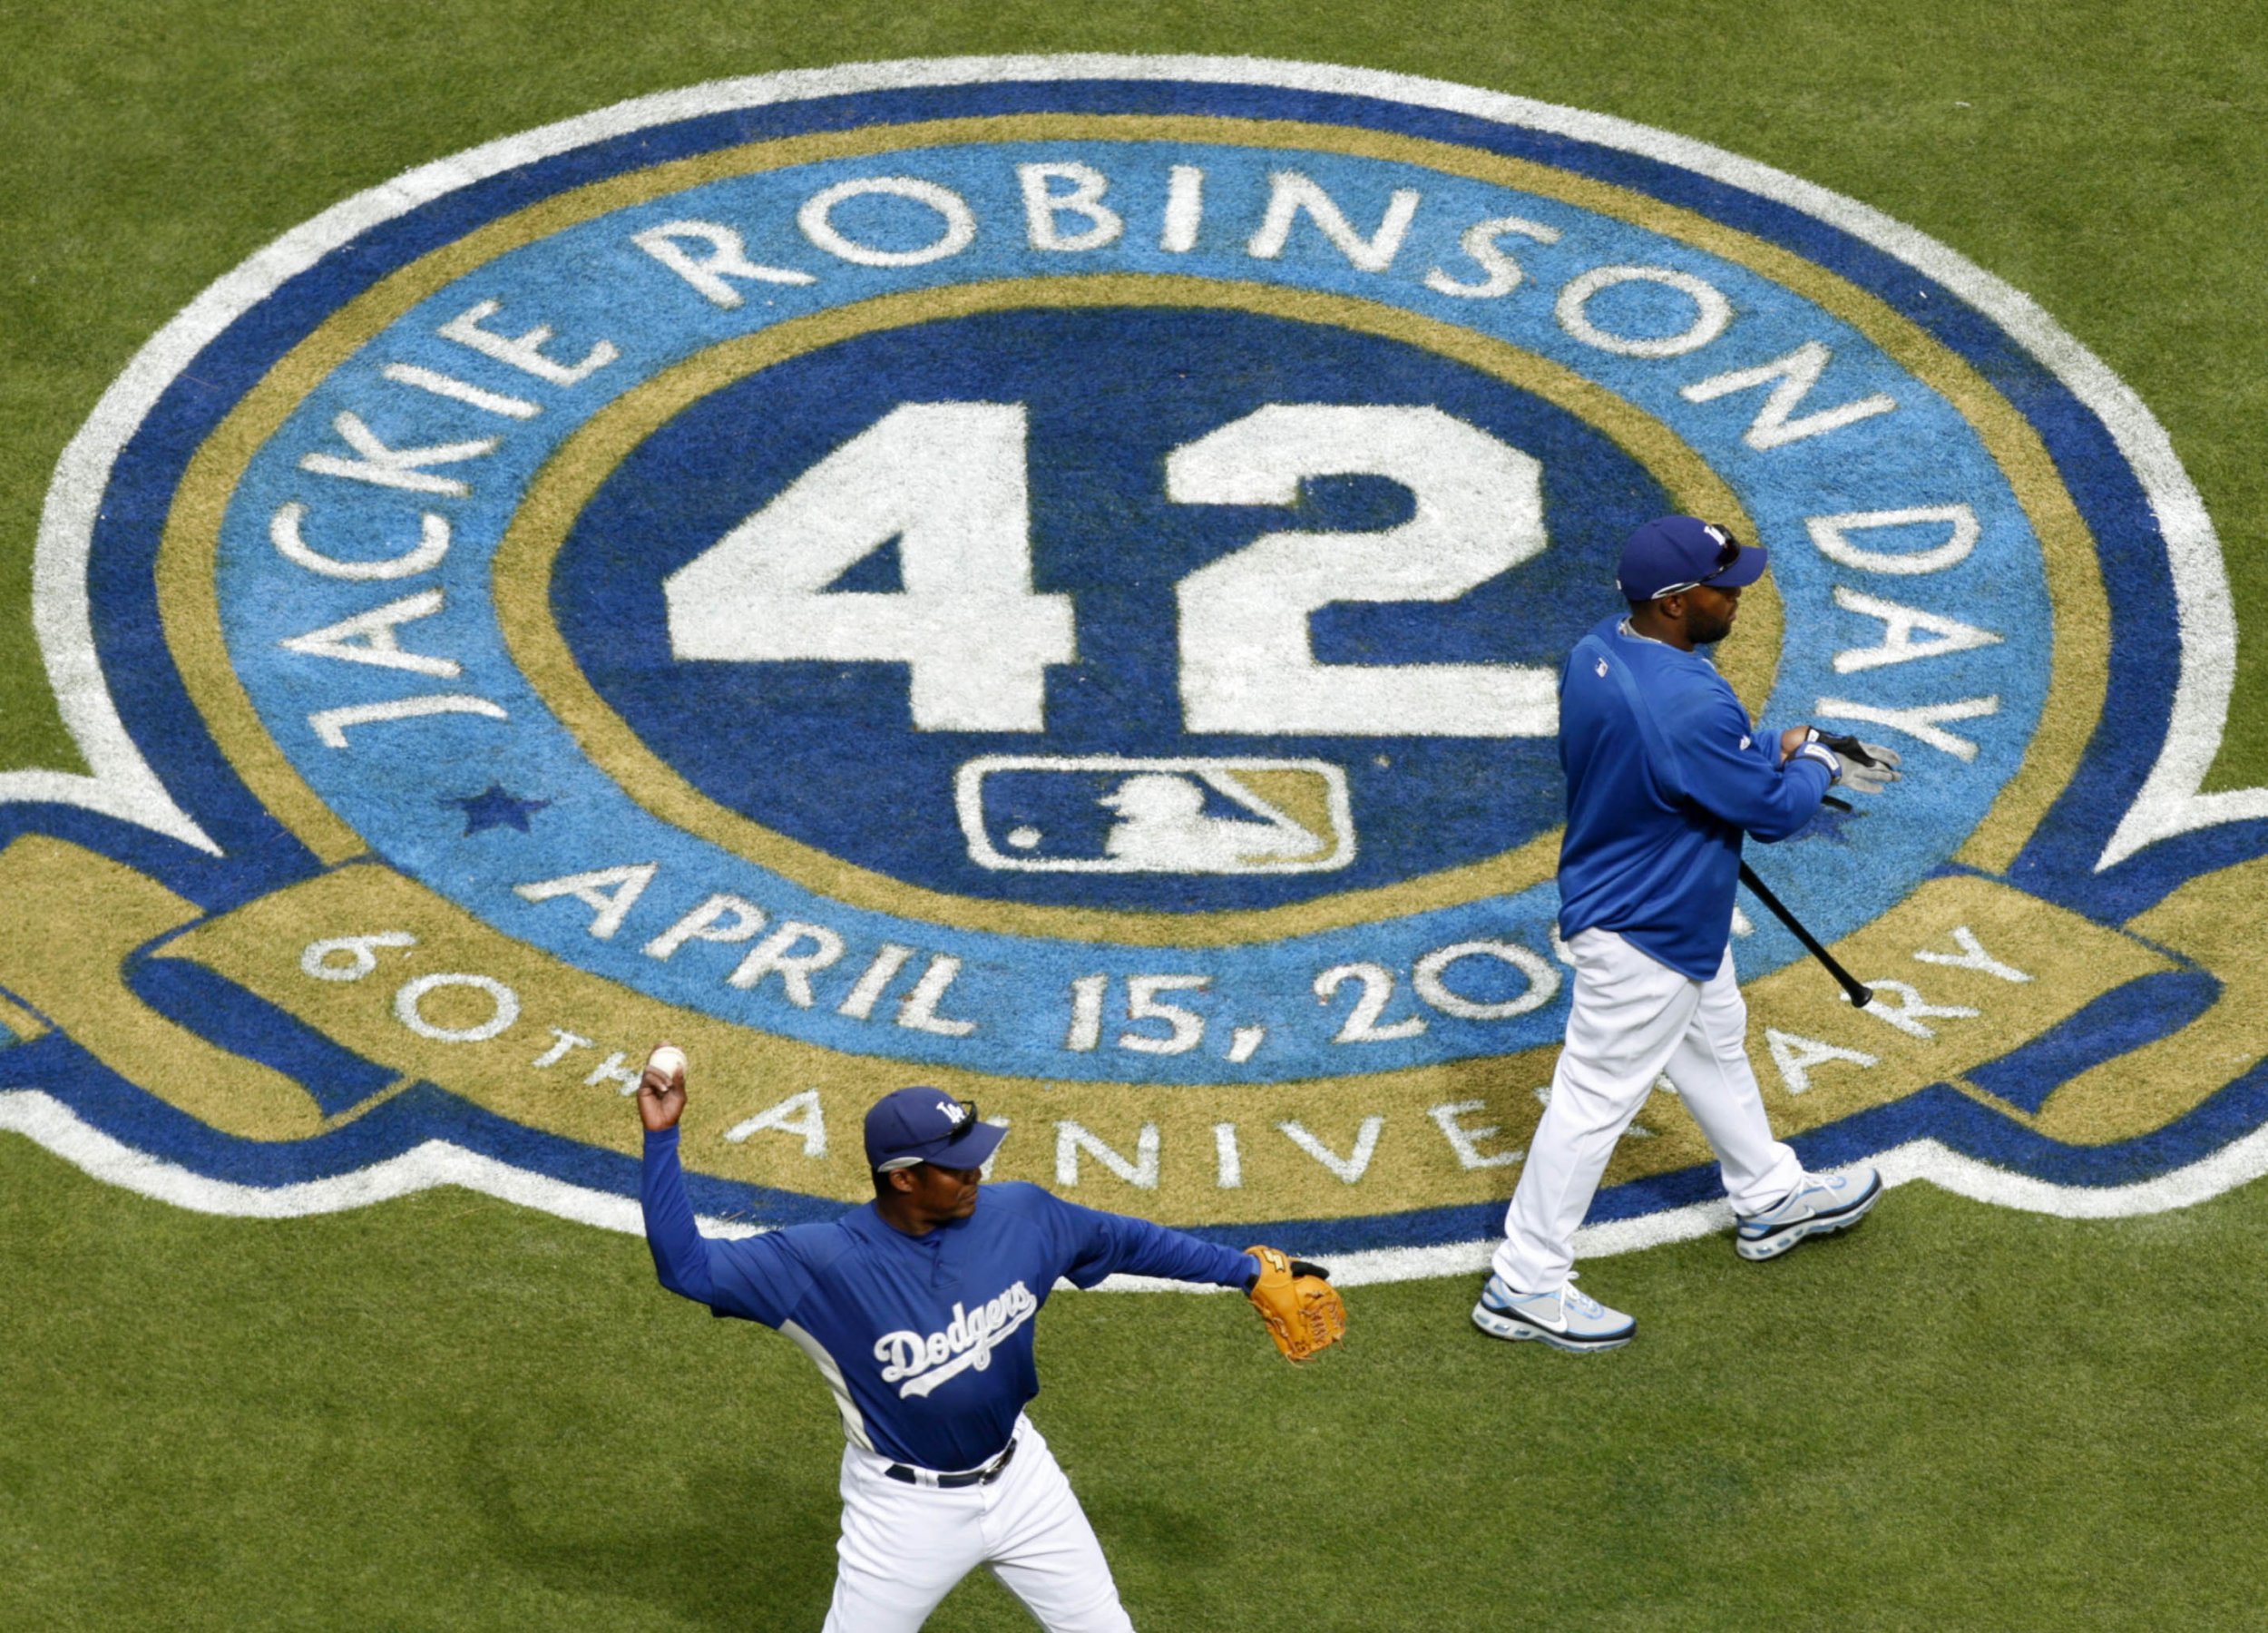 jackie robinson 42 quotes